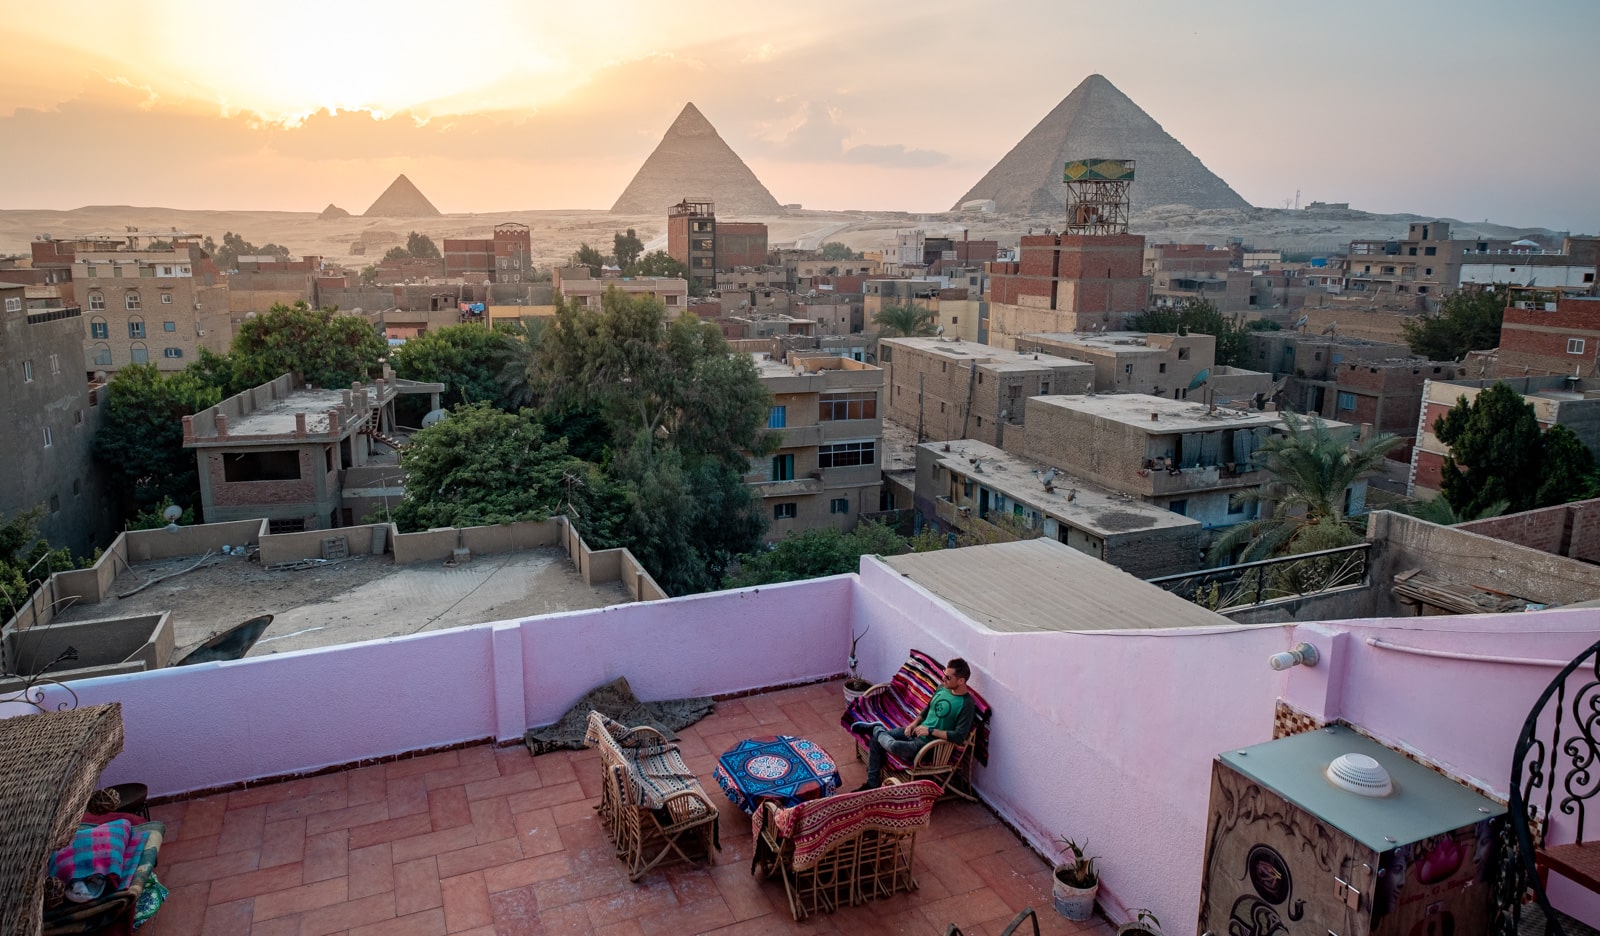 The balcony of a local hotel in Cairo overlooking the pyramids in Egypt